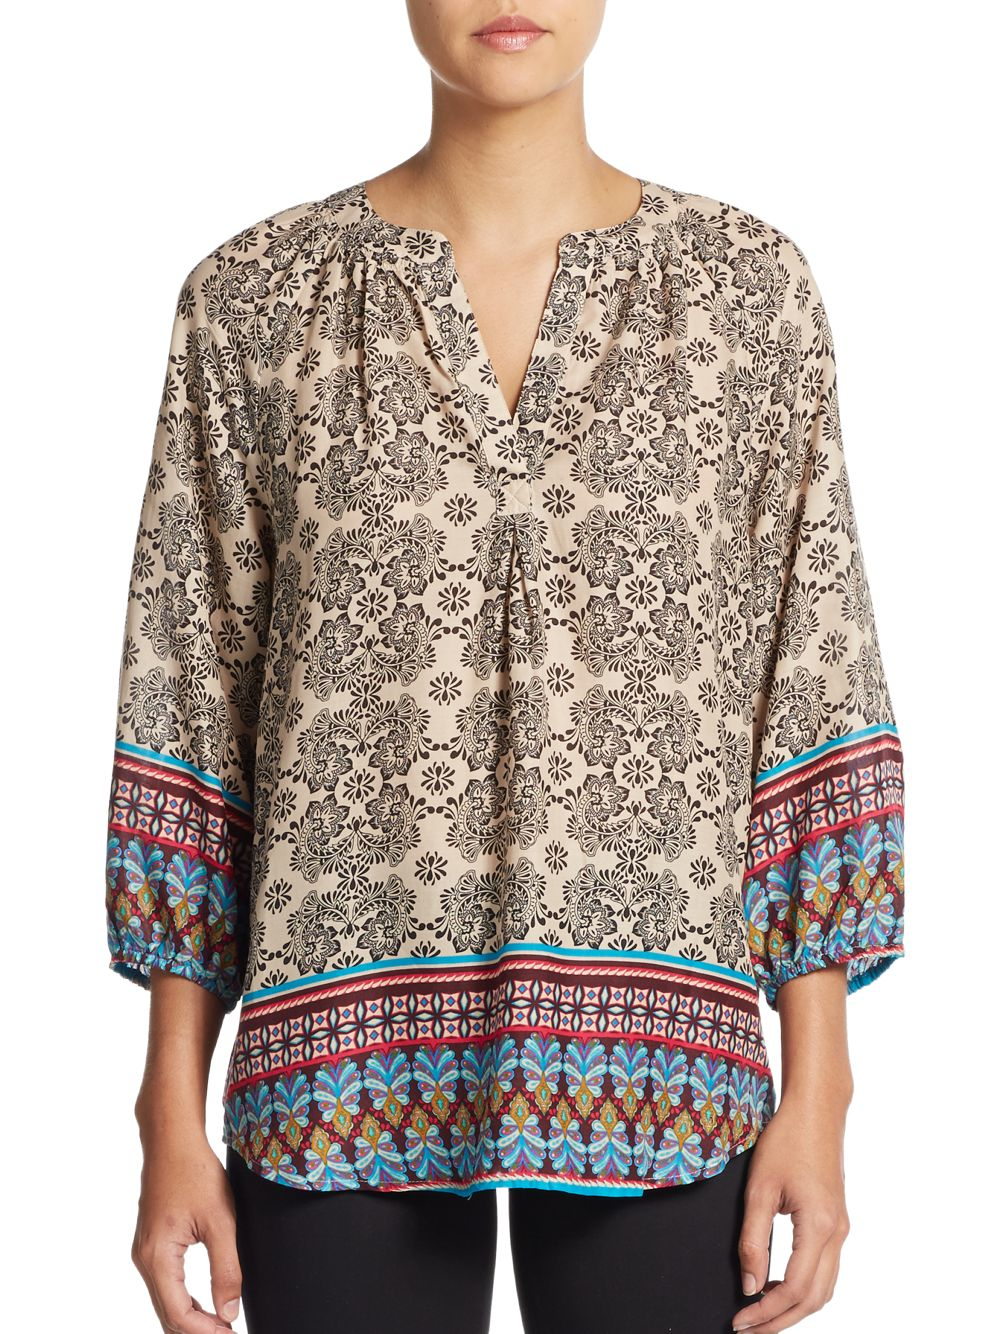 Lyst - Beach Lunch Lounge Helena Top in Natural